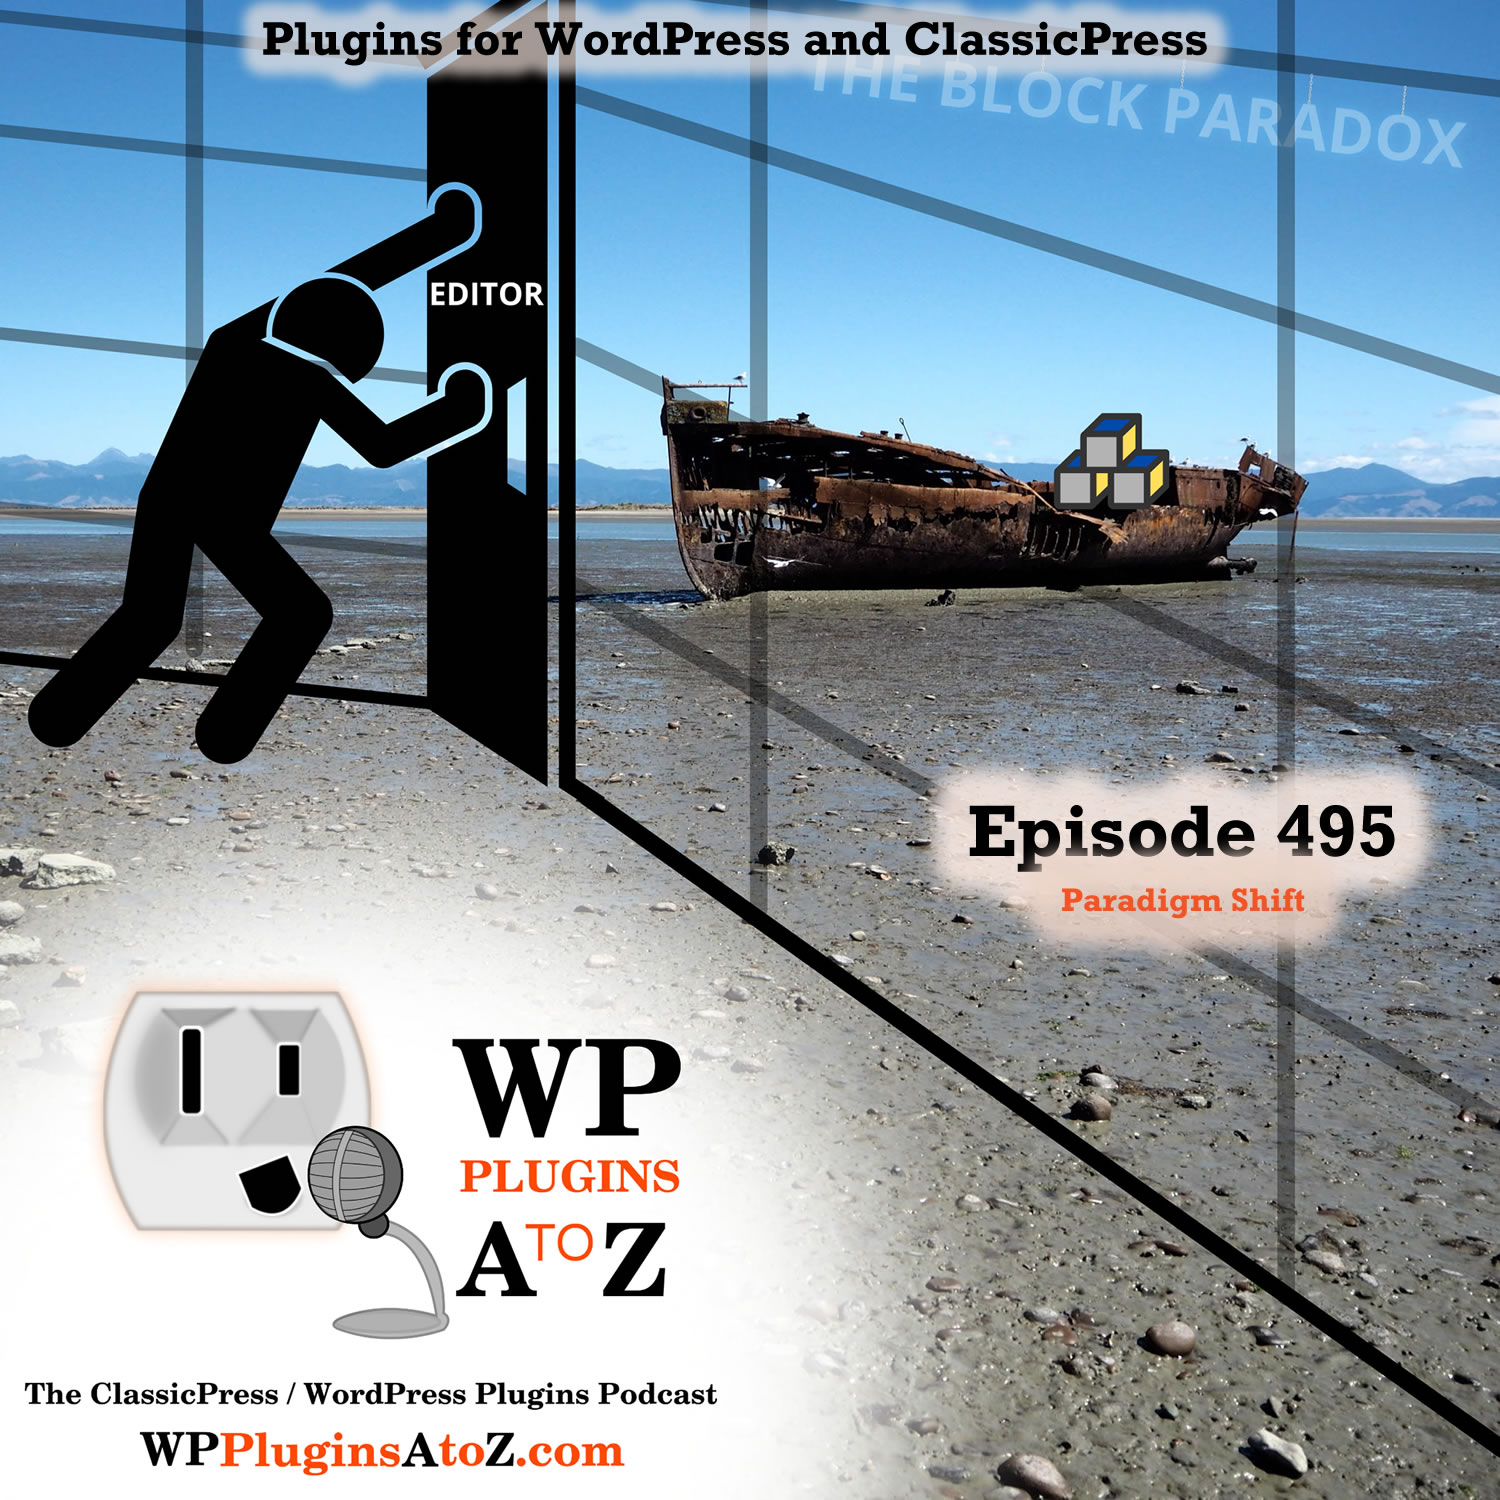 Paradigm Shift It's Episode 495 We have plugins for Hide & Seek, Email Automation, Stopping the Brutality, Mobile Content, Image Control, Live Chat ..., and ClassicPress Options. It's all coming up on WordPress Plugins A-Z! Brosix Live Chat, WordPress Brute Force Protection – Stop Brute Force Attacks, Thumblink, Specific Content for Mobile, Mail Mage, Show/Hide Content at Set Time and ClassicPress options on Episode 495.